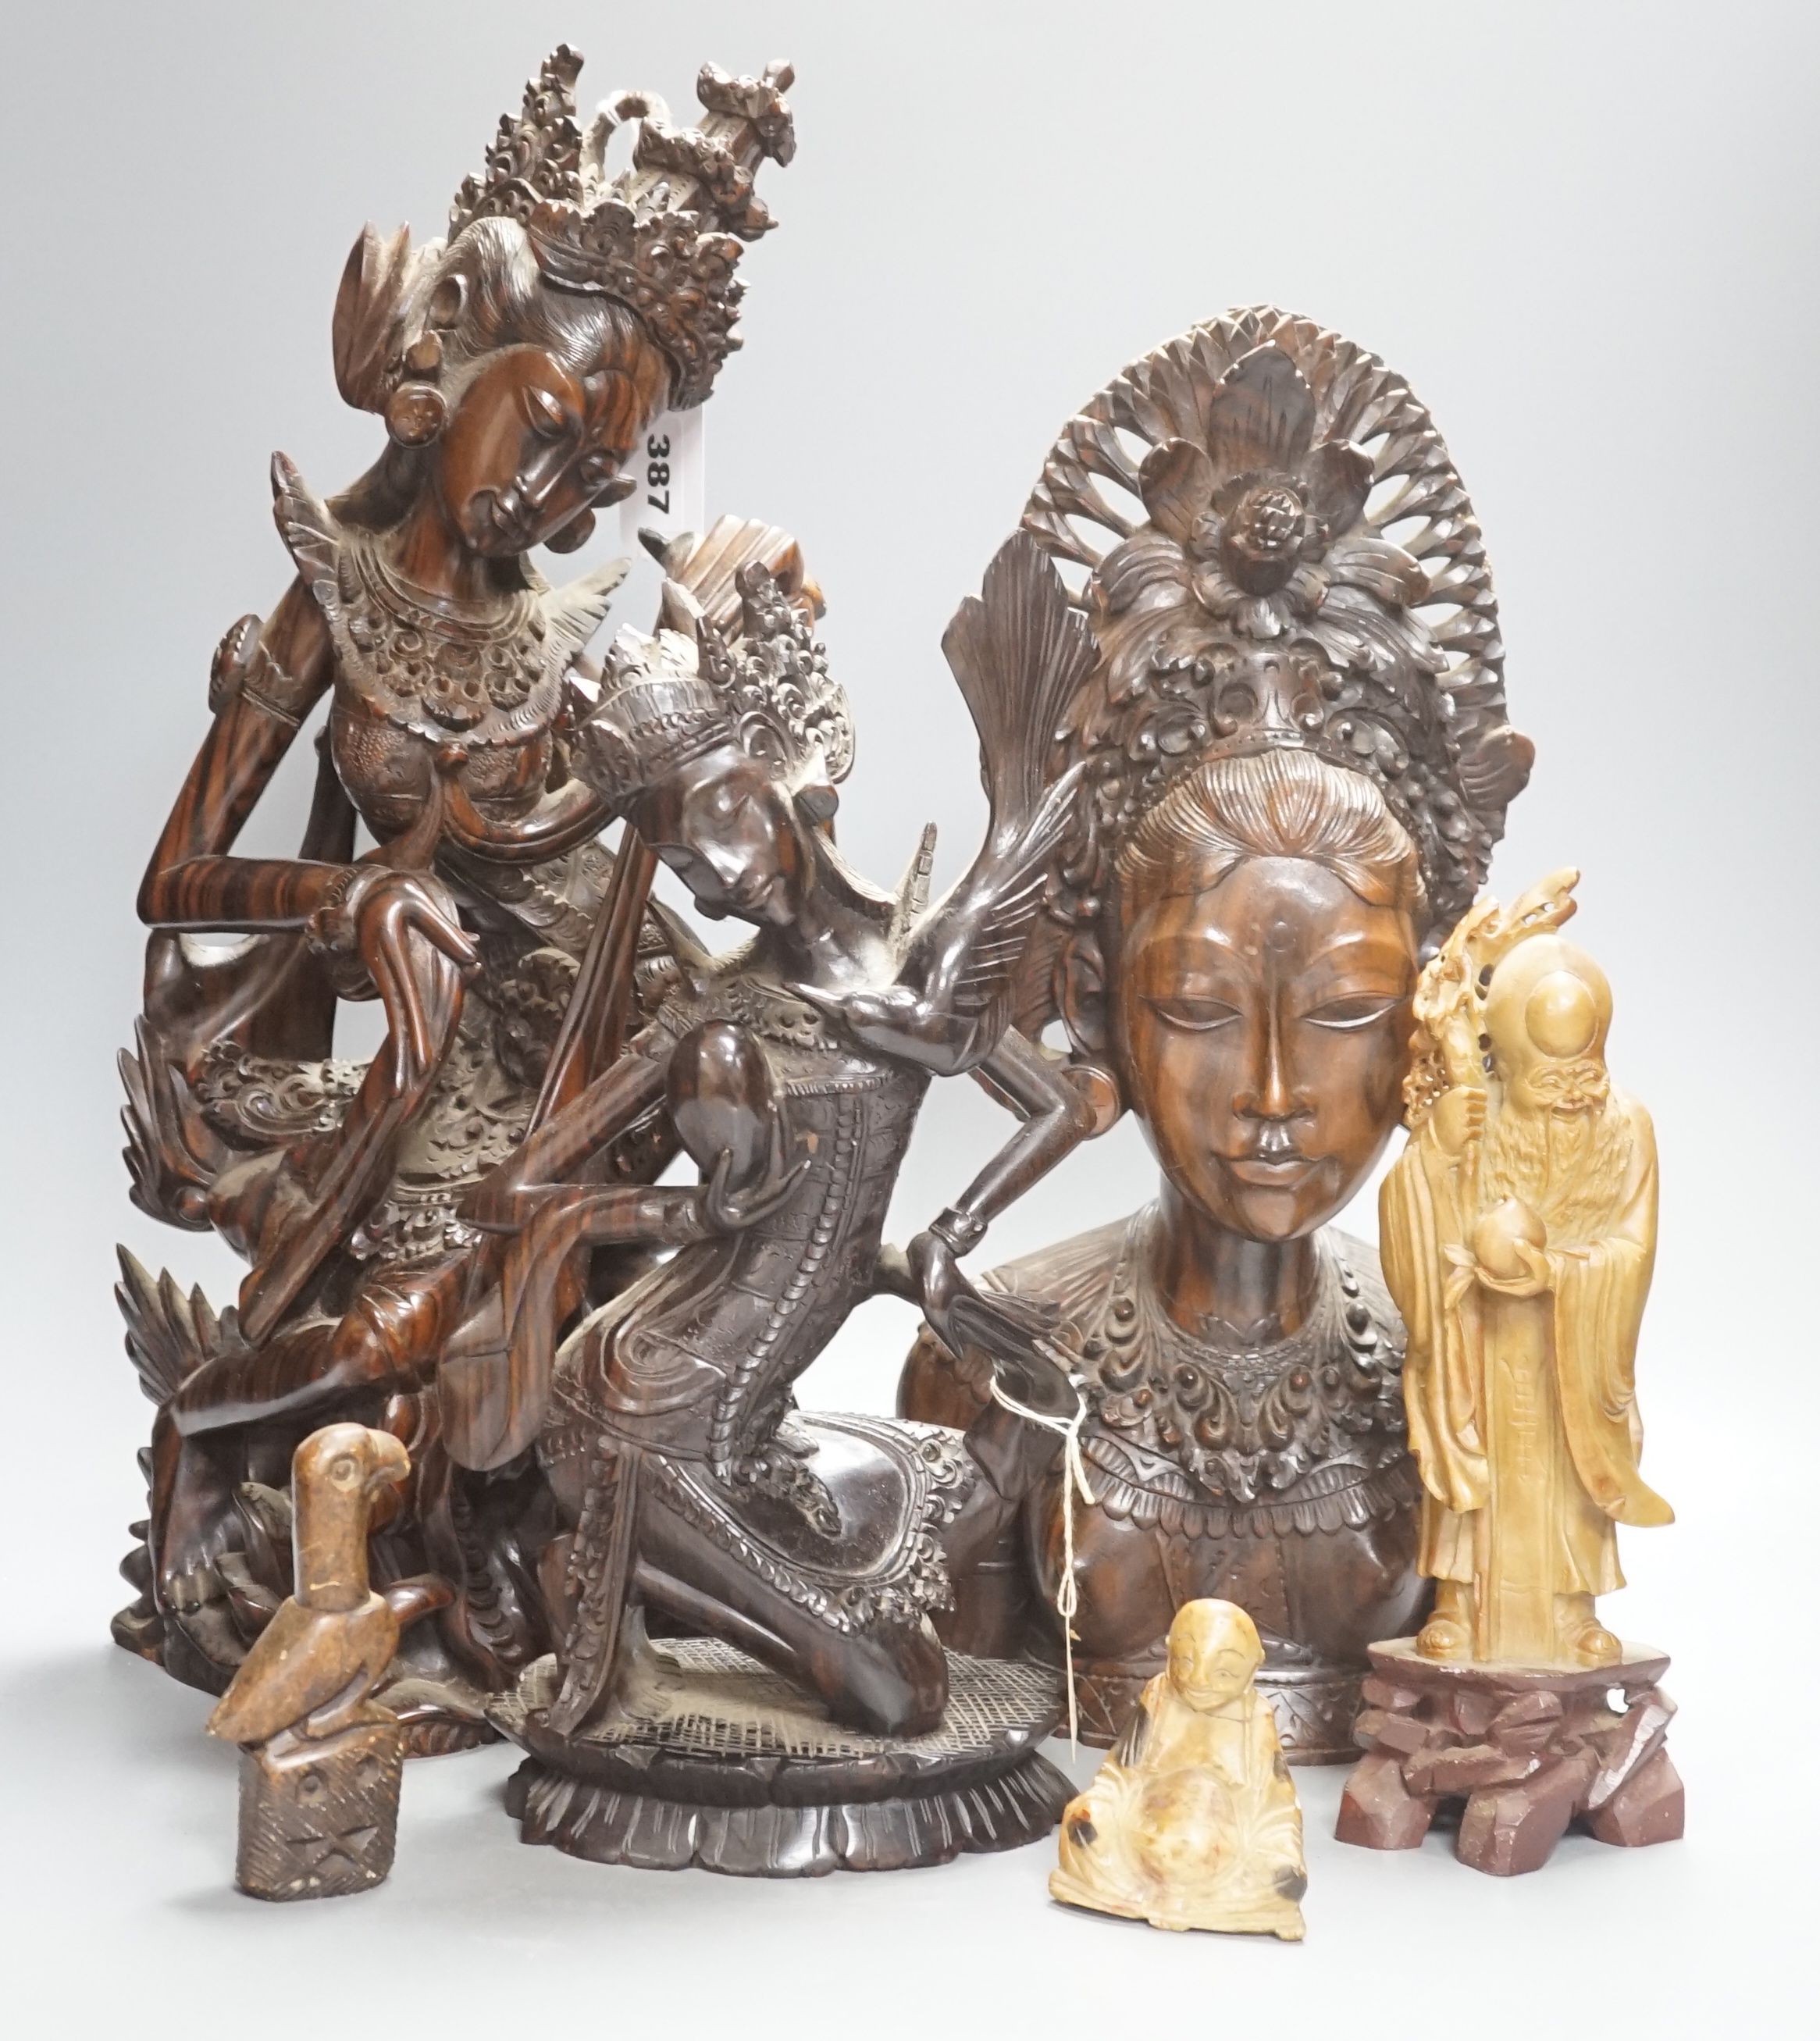 Three Balinese hardwood Macassar Ebony carvings, tallest 44.5 cm, two Chinese soapstone carvings and another